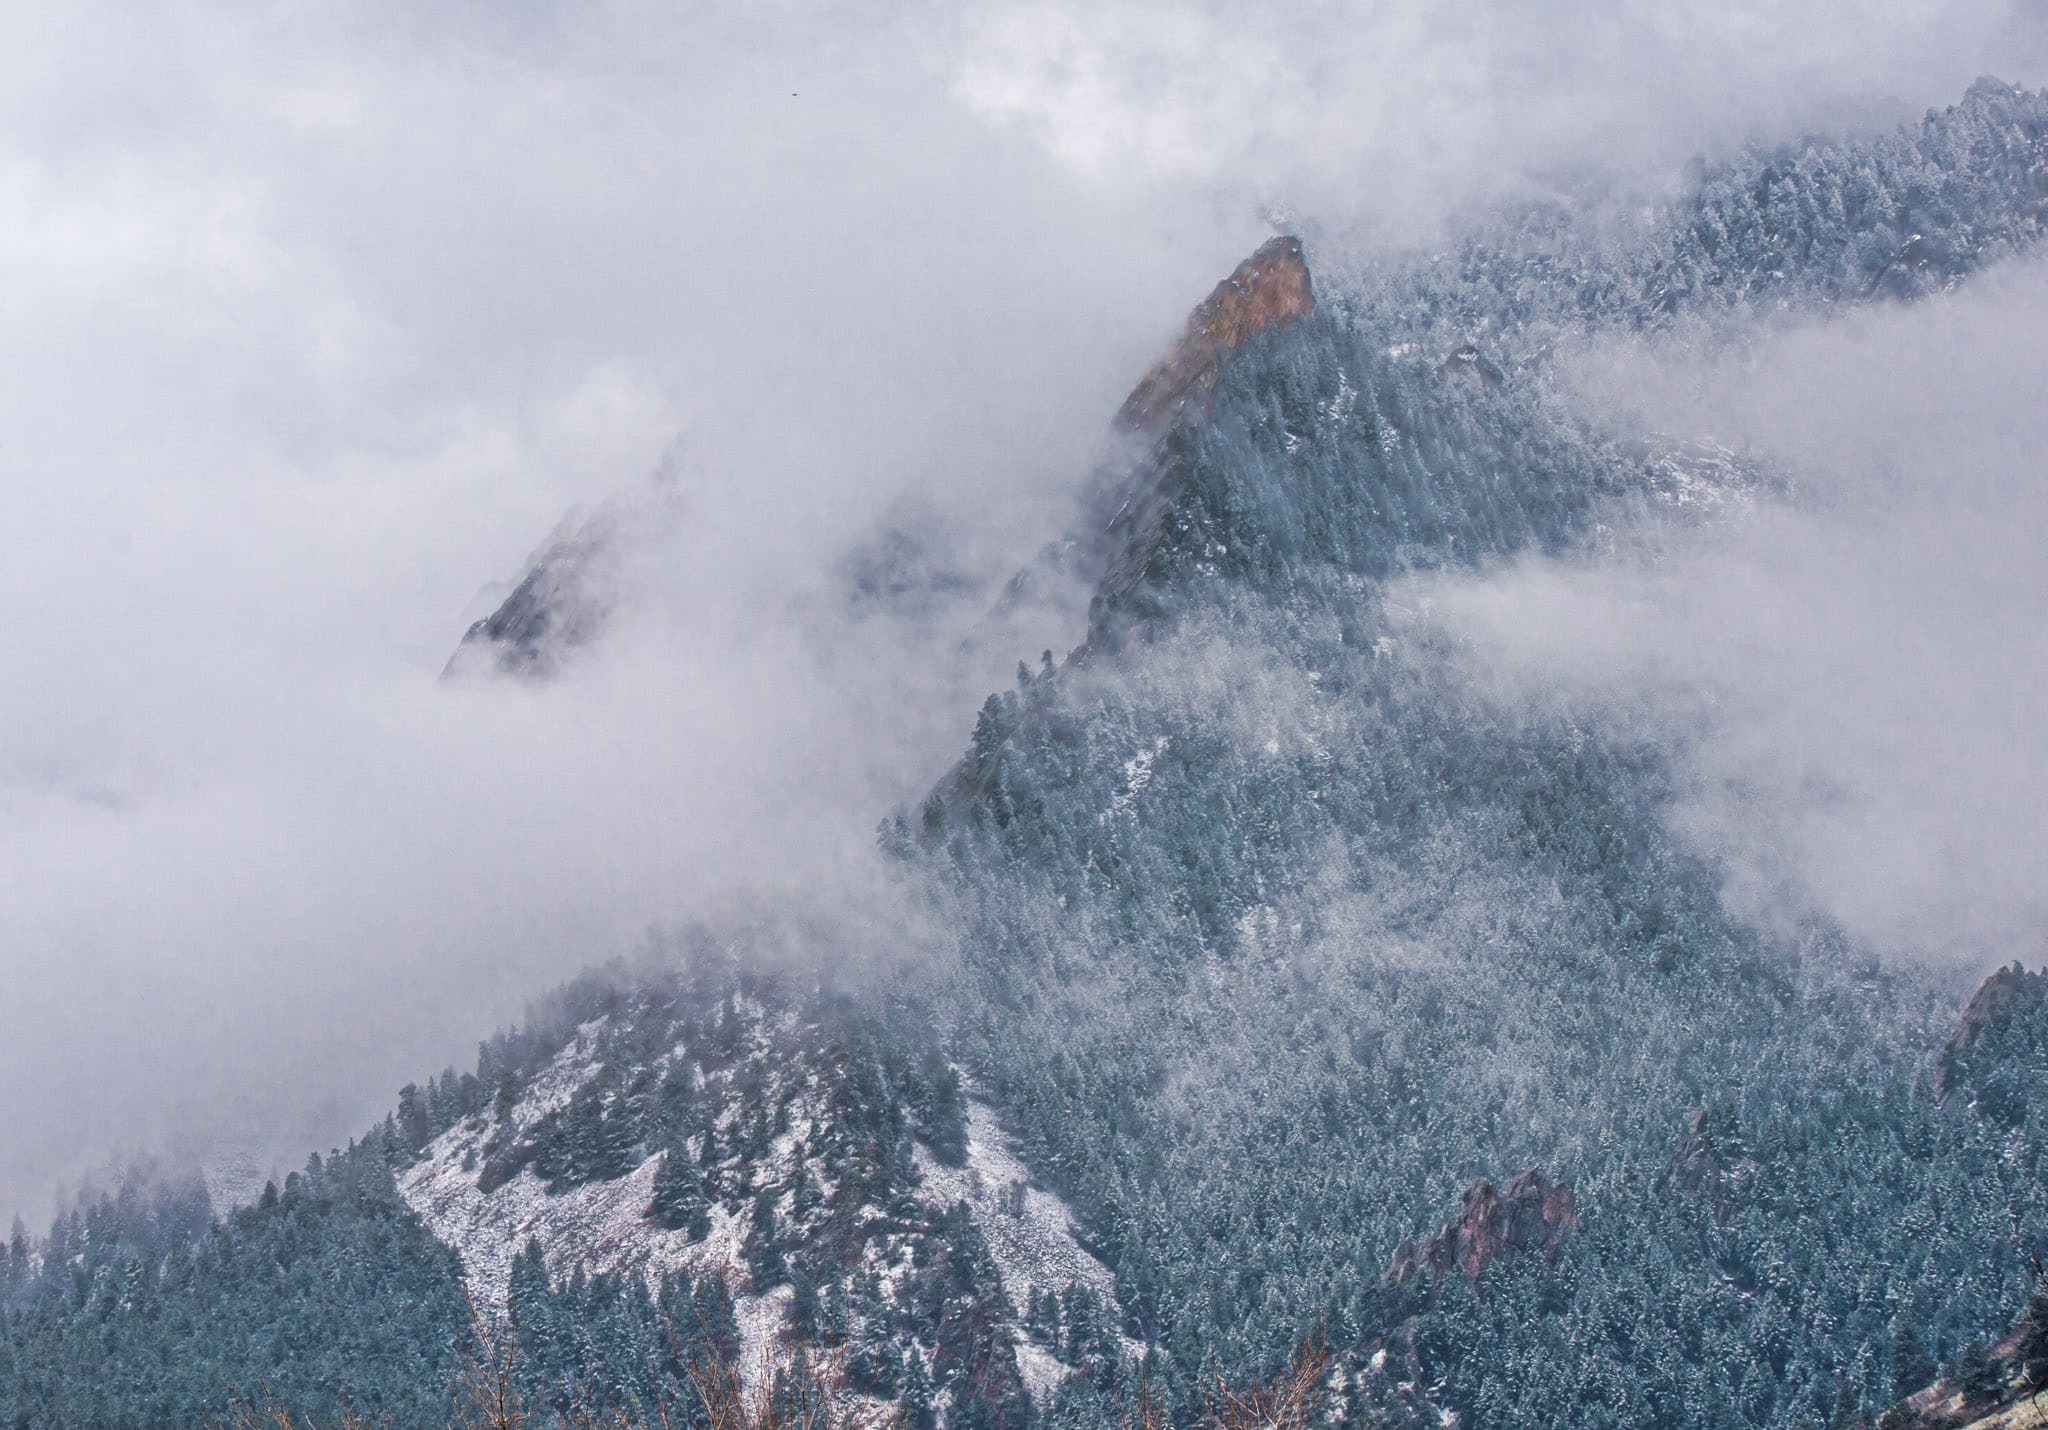 The First Flatiron on the west side of Boulder, Colorado, is barely visible through the snow and clouds.